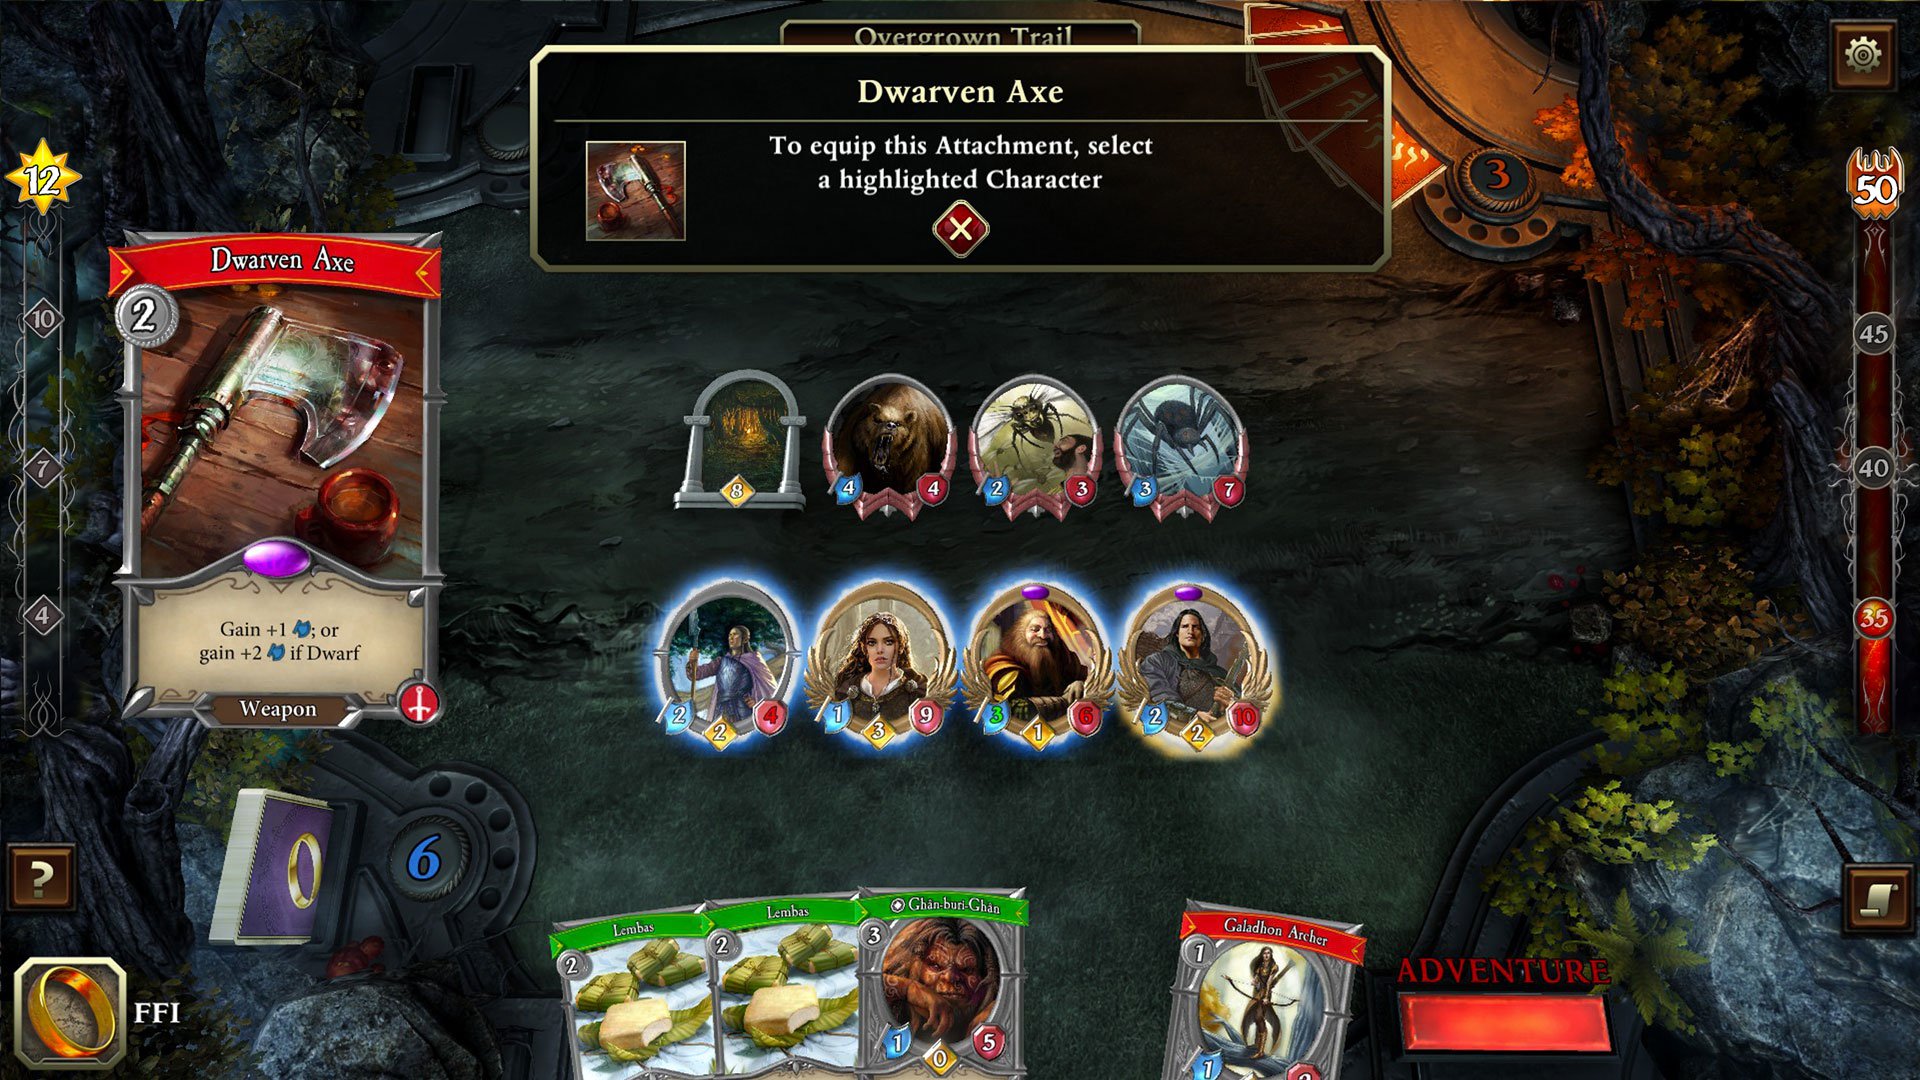 switch lord of the rings card game